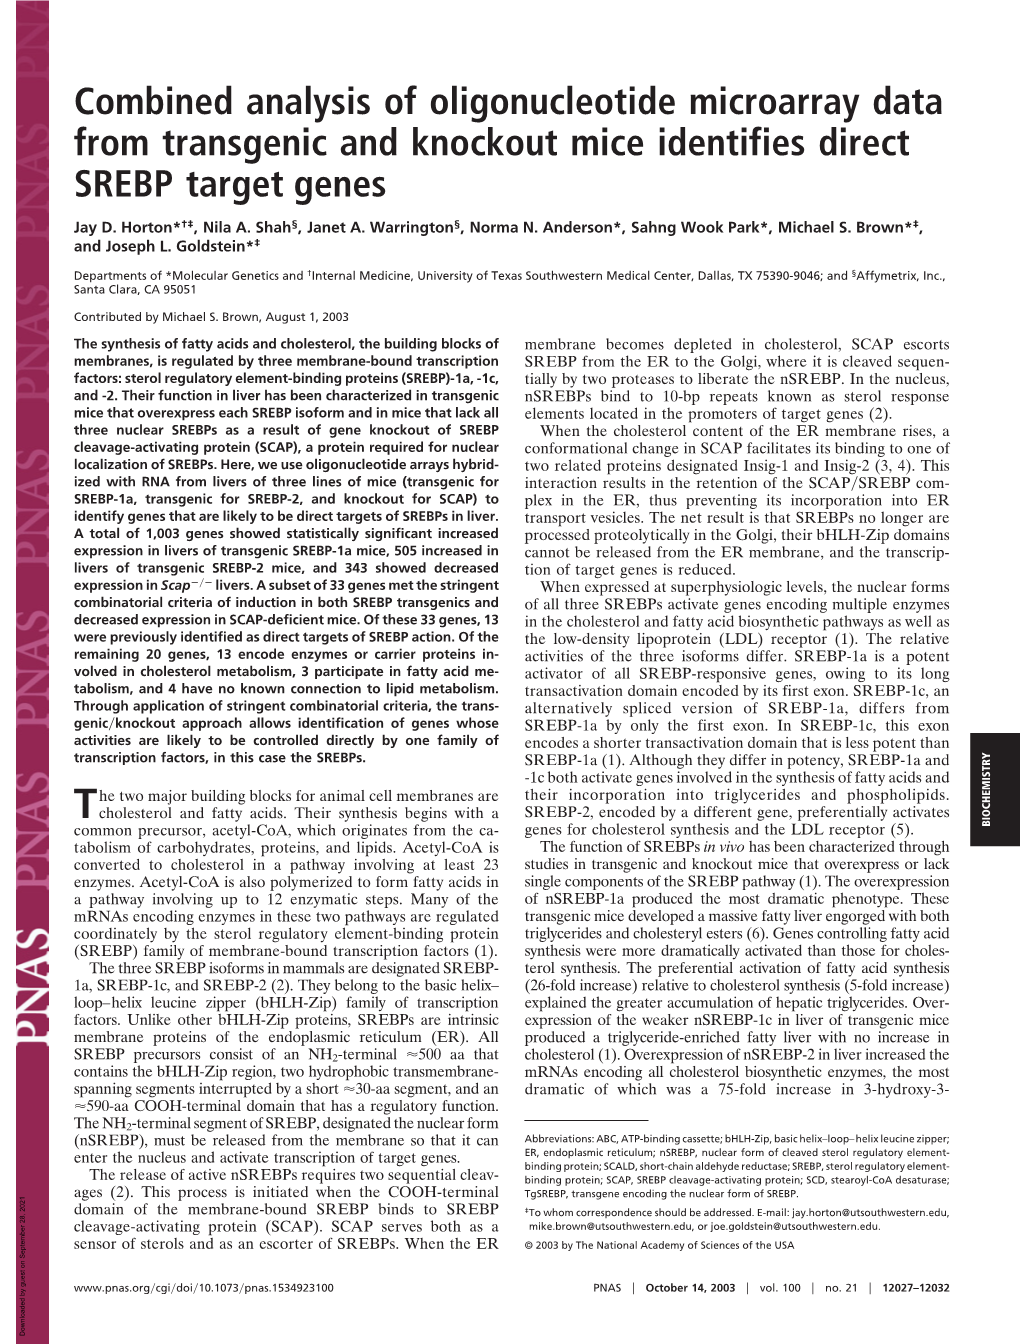 Combined Analysis of Oligonucleotide Microarray Data from Transgenic and Knockout Mice Identifies Direct SREBP Target Genes